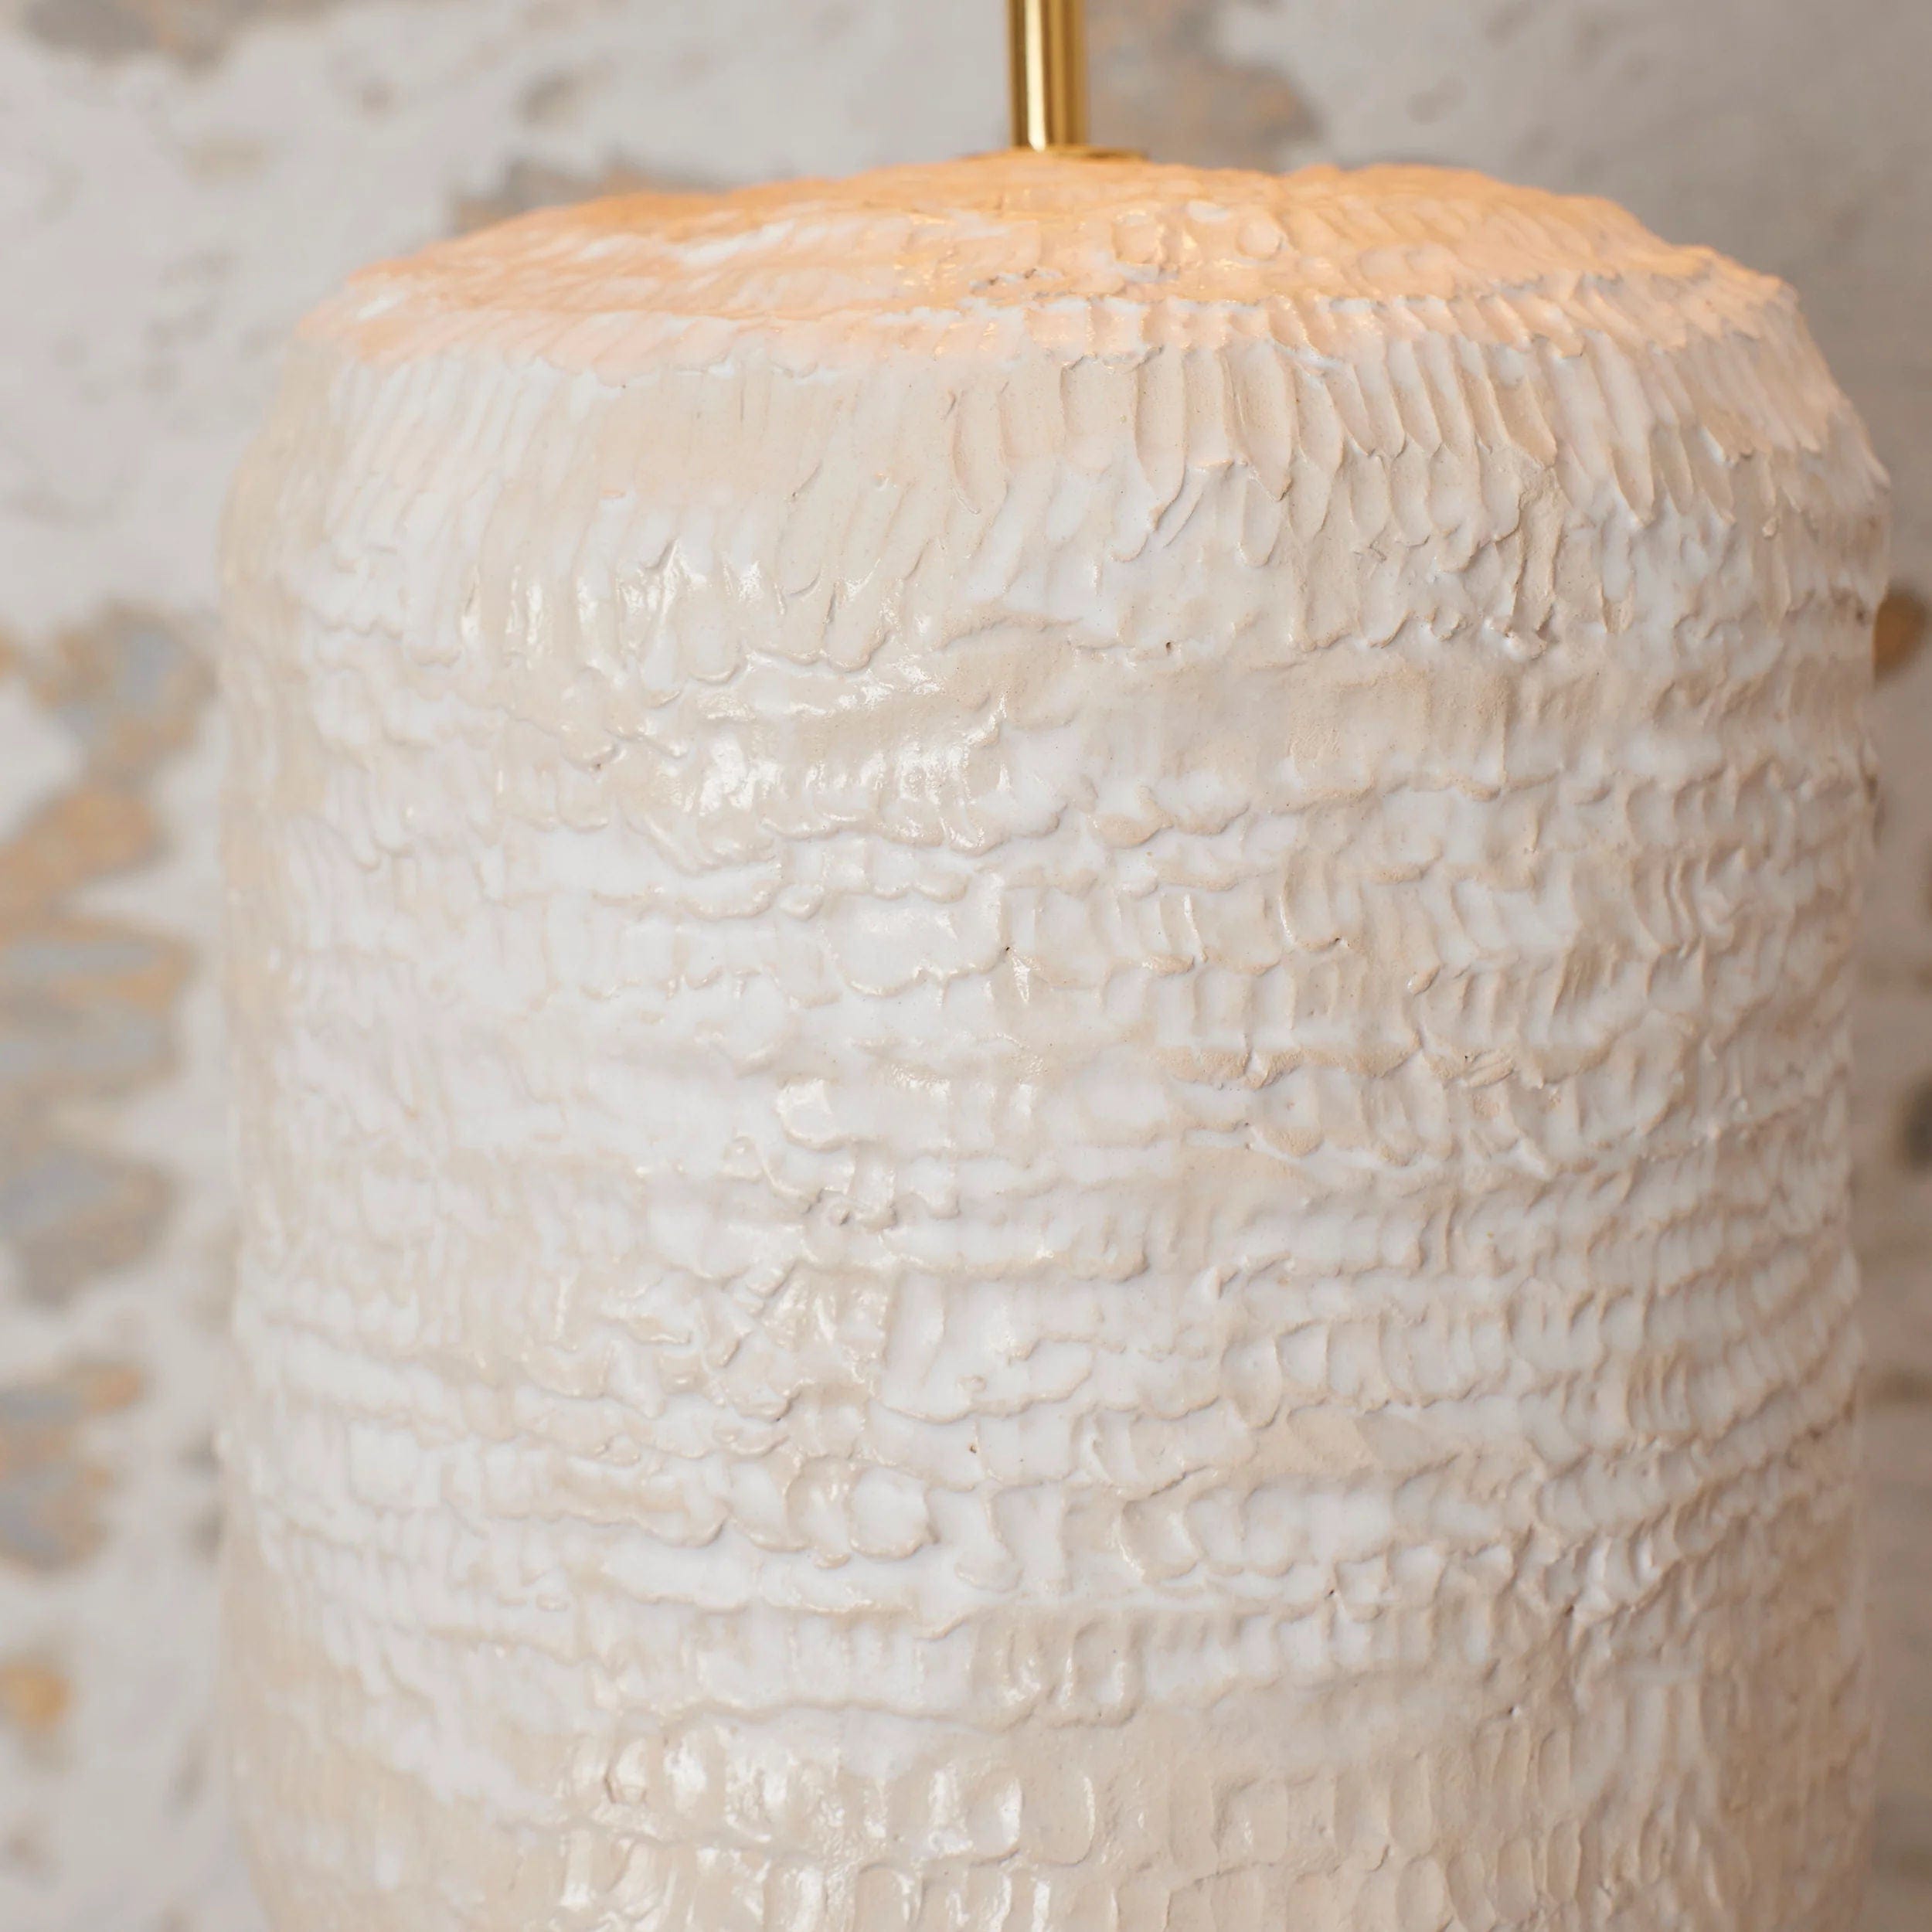 Table Lamps Textured Ceramic Lamp Project 213A